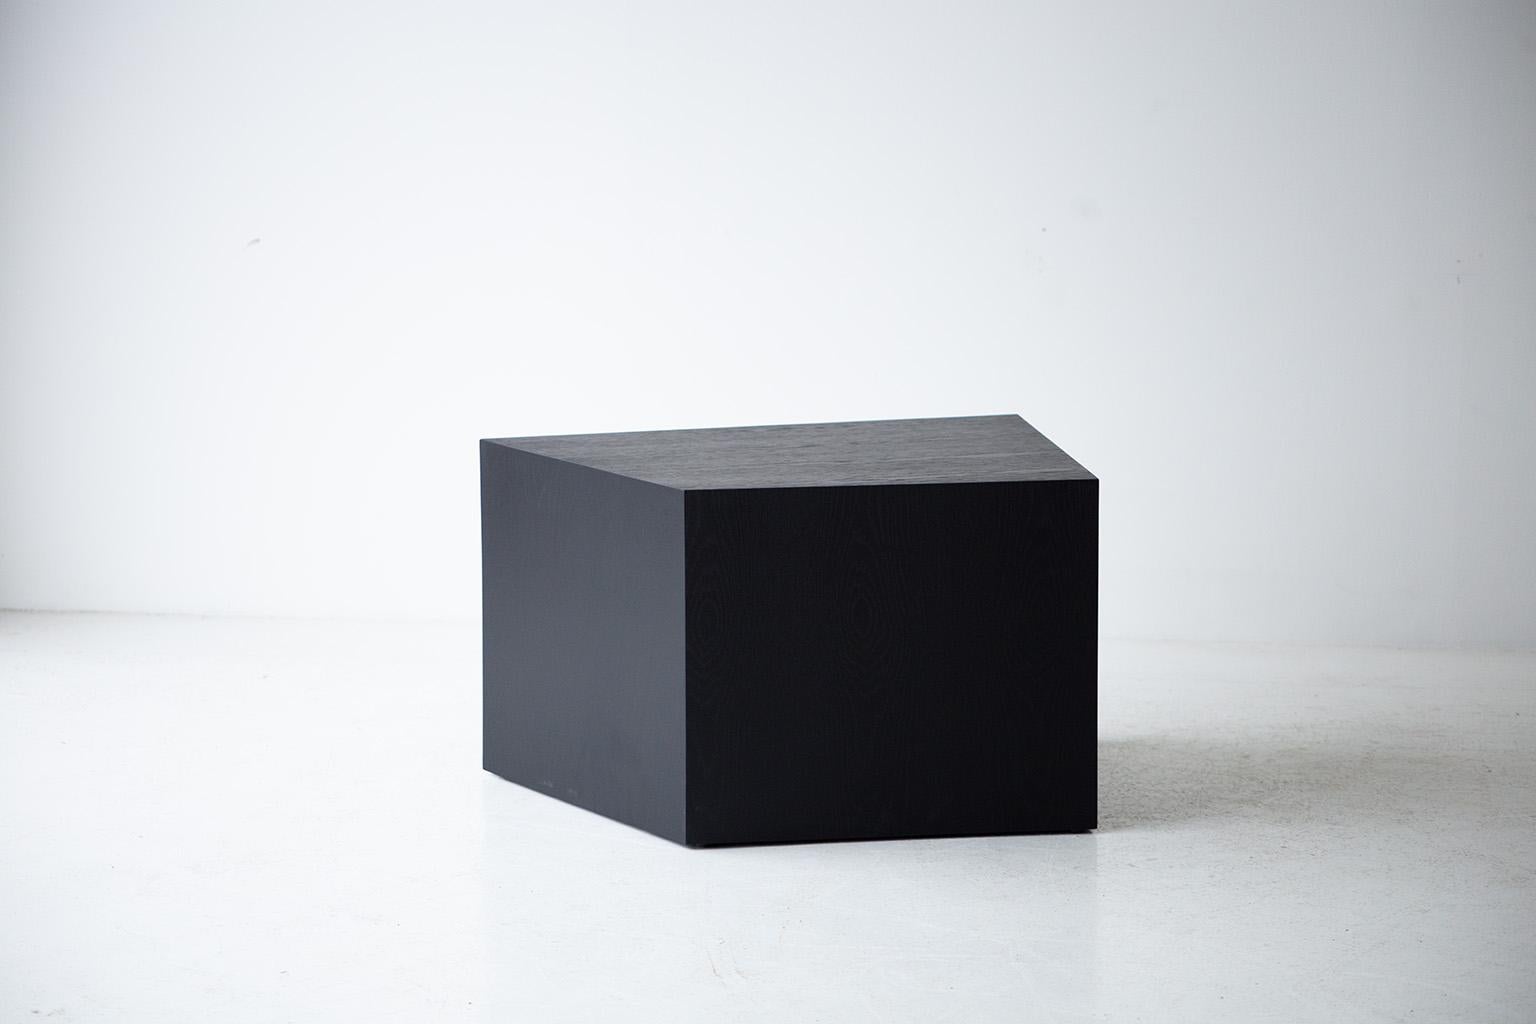 This listing is for the smaller version.

This Modern Coffee Table - The Crag Tables are made in the heart of Ohio with locally sourced wood. Each table is a hand-made mitered box from white oak veneer and finished with a beautiful matte black